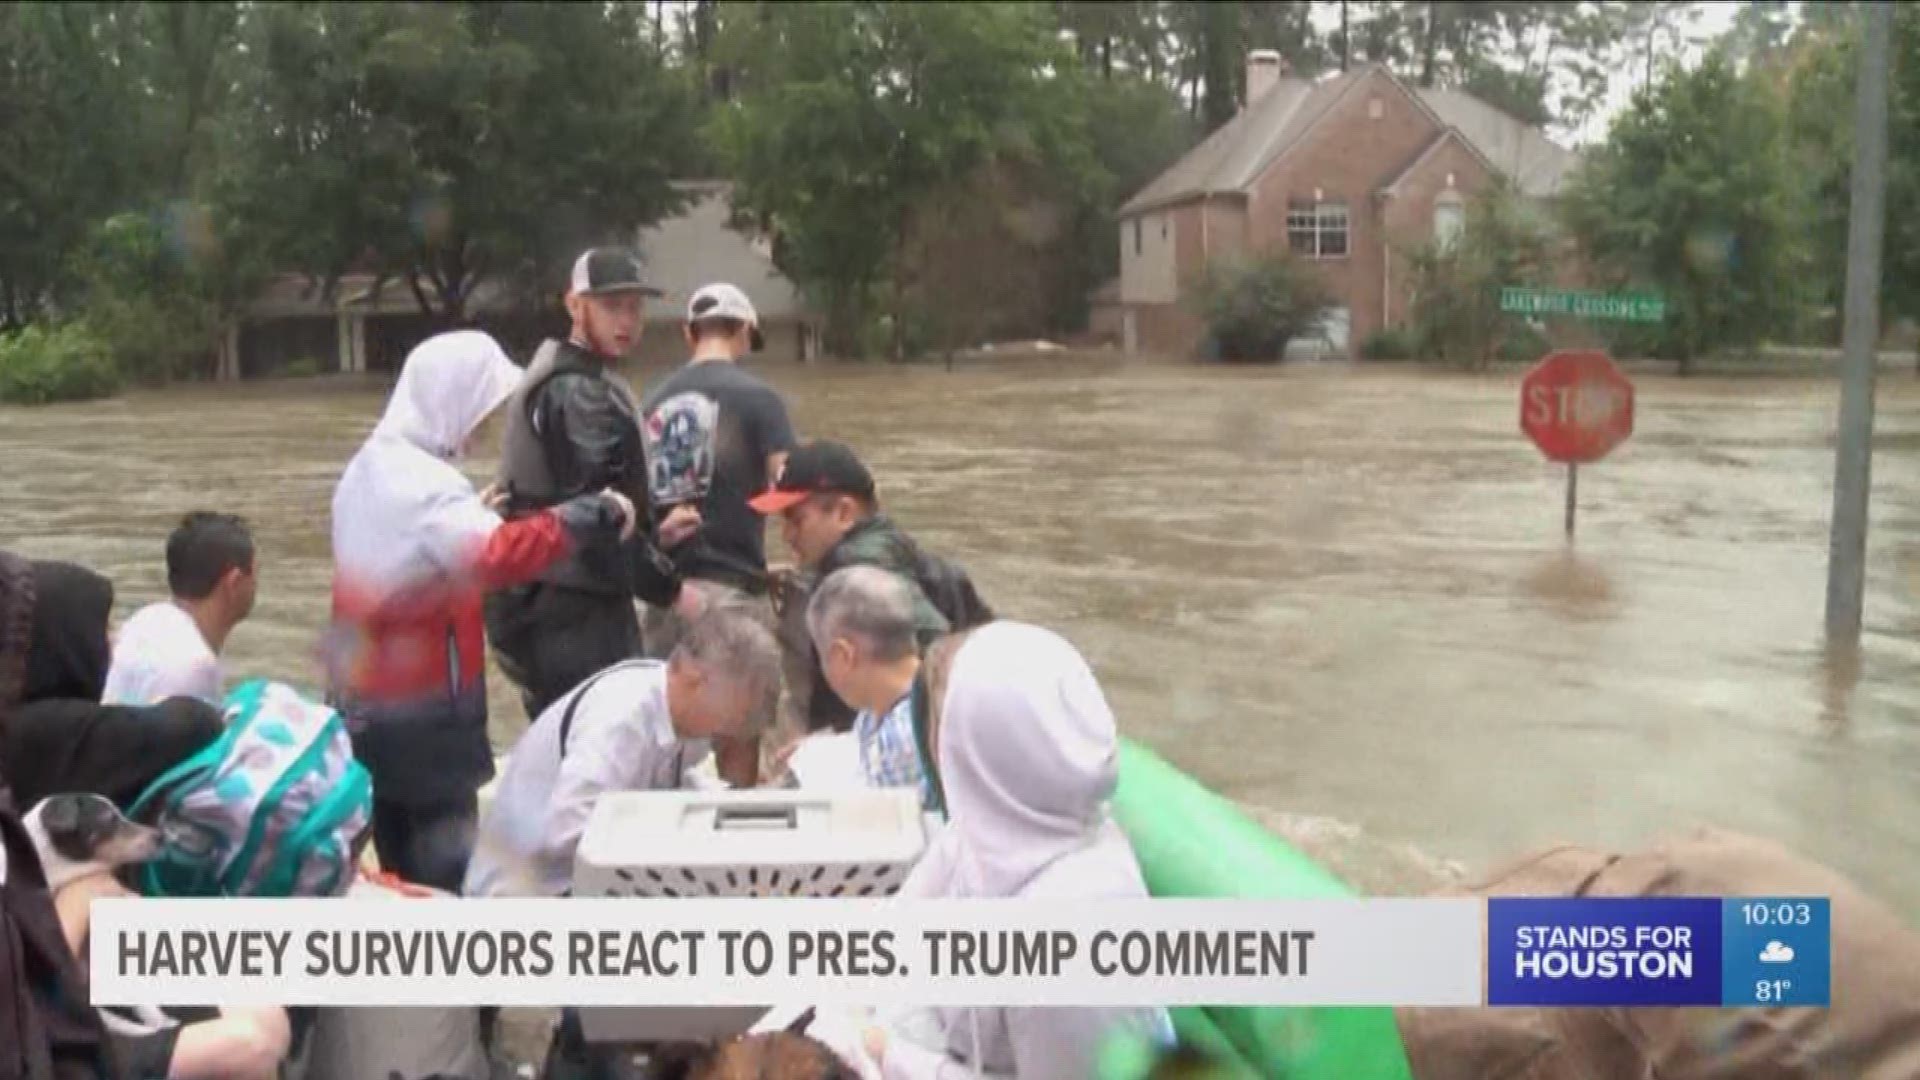 Reaction is pouring in after a comment made by President Trump Wednesday about people being rescued by the Coast Guard during Hurricane  Harvey.